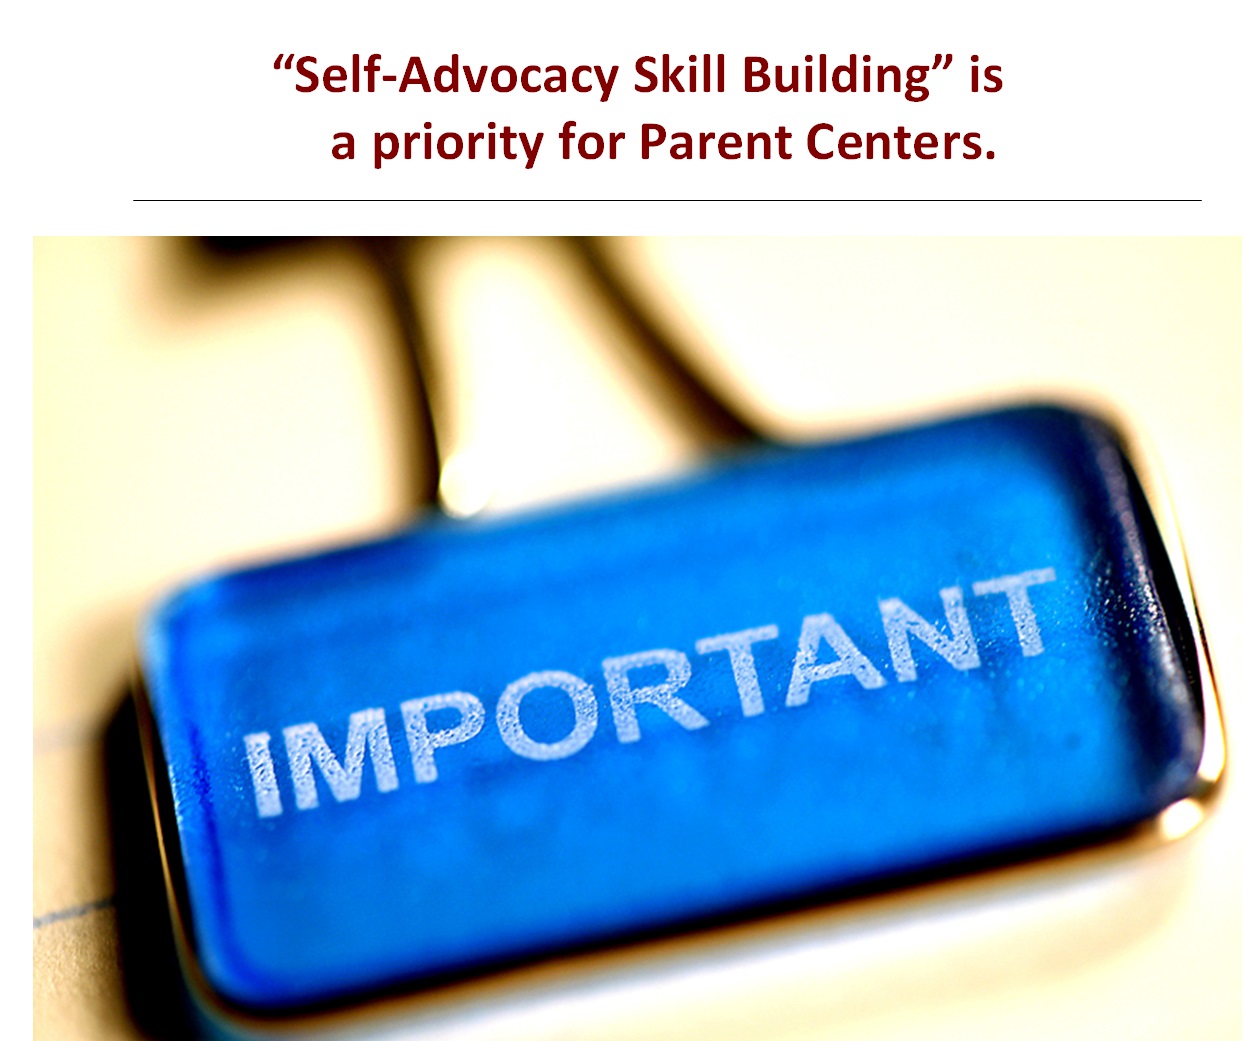 Slide from the webinar saying that Self-Advocacy Skill Building is a priority for Parent Centers.